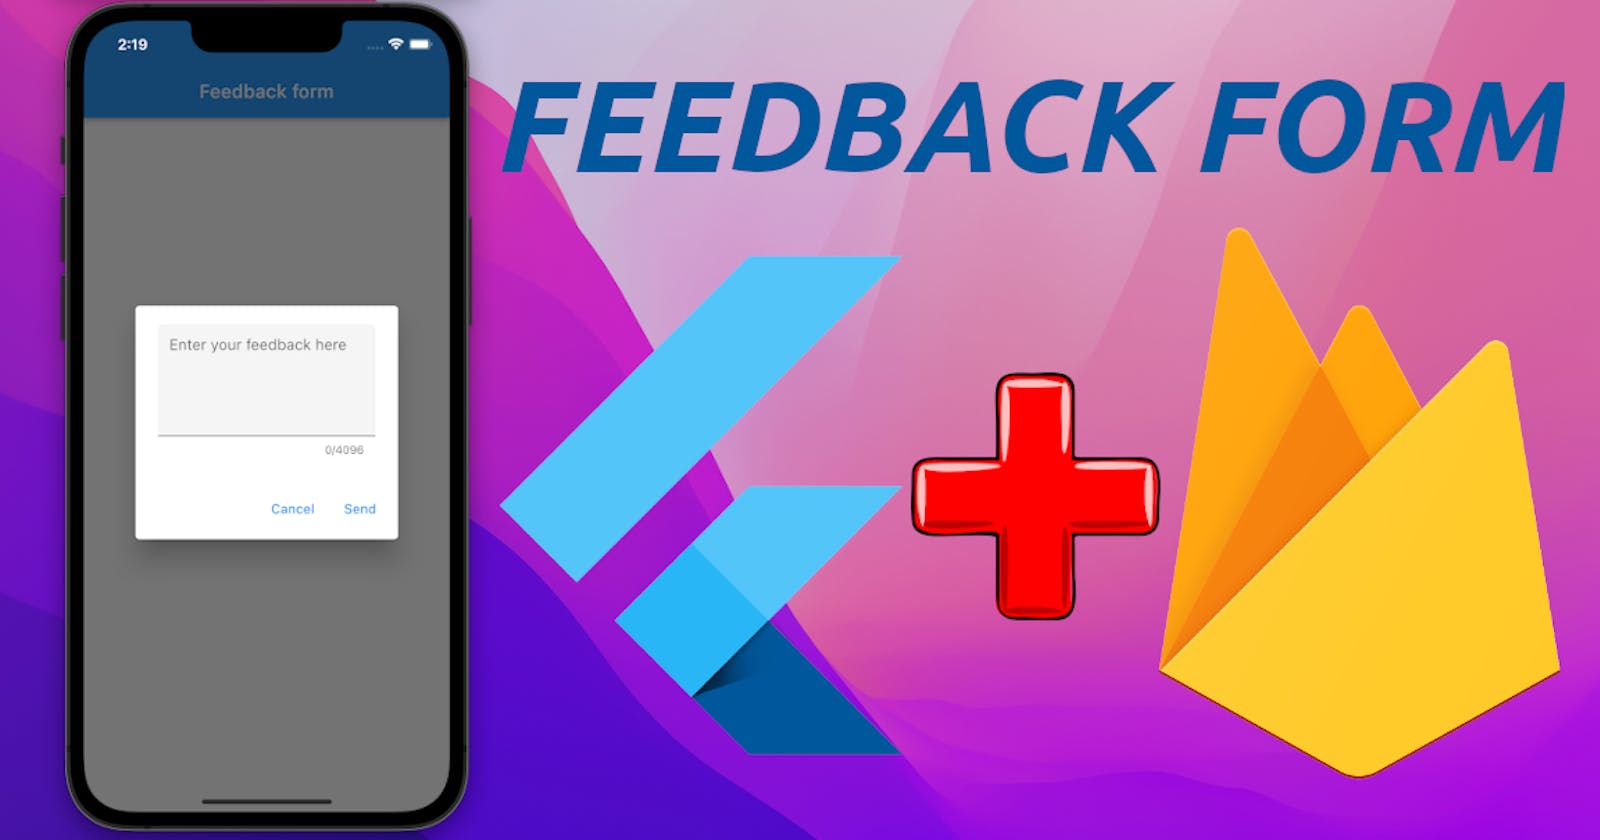 Create a feedback form with Flutter and Firebase